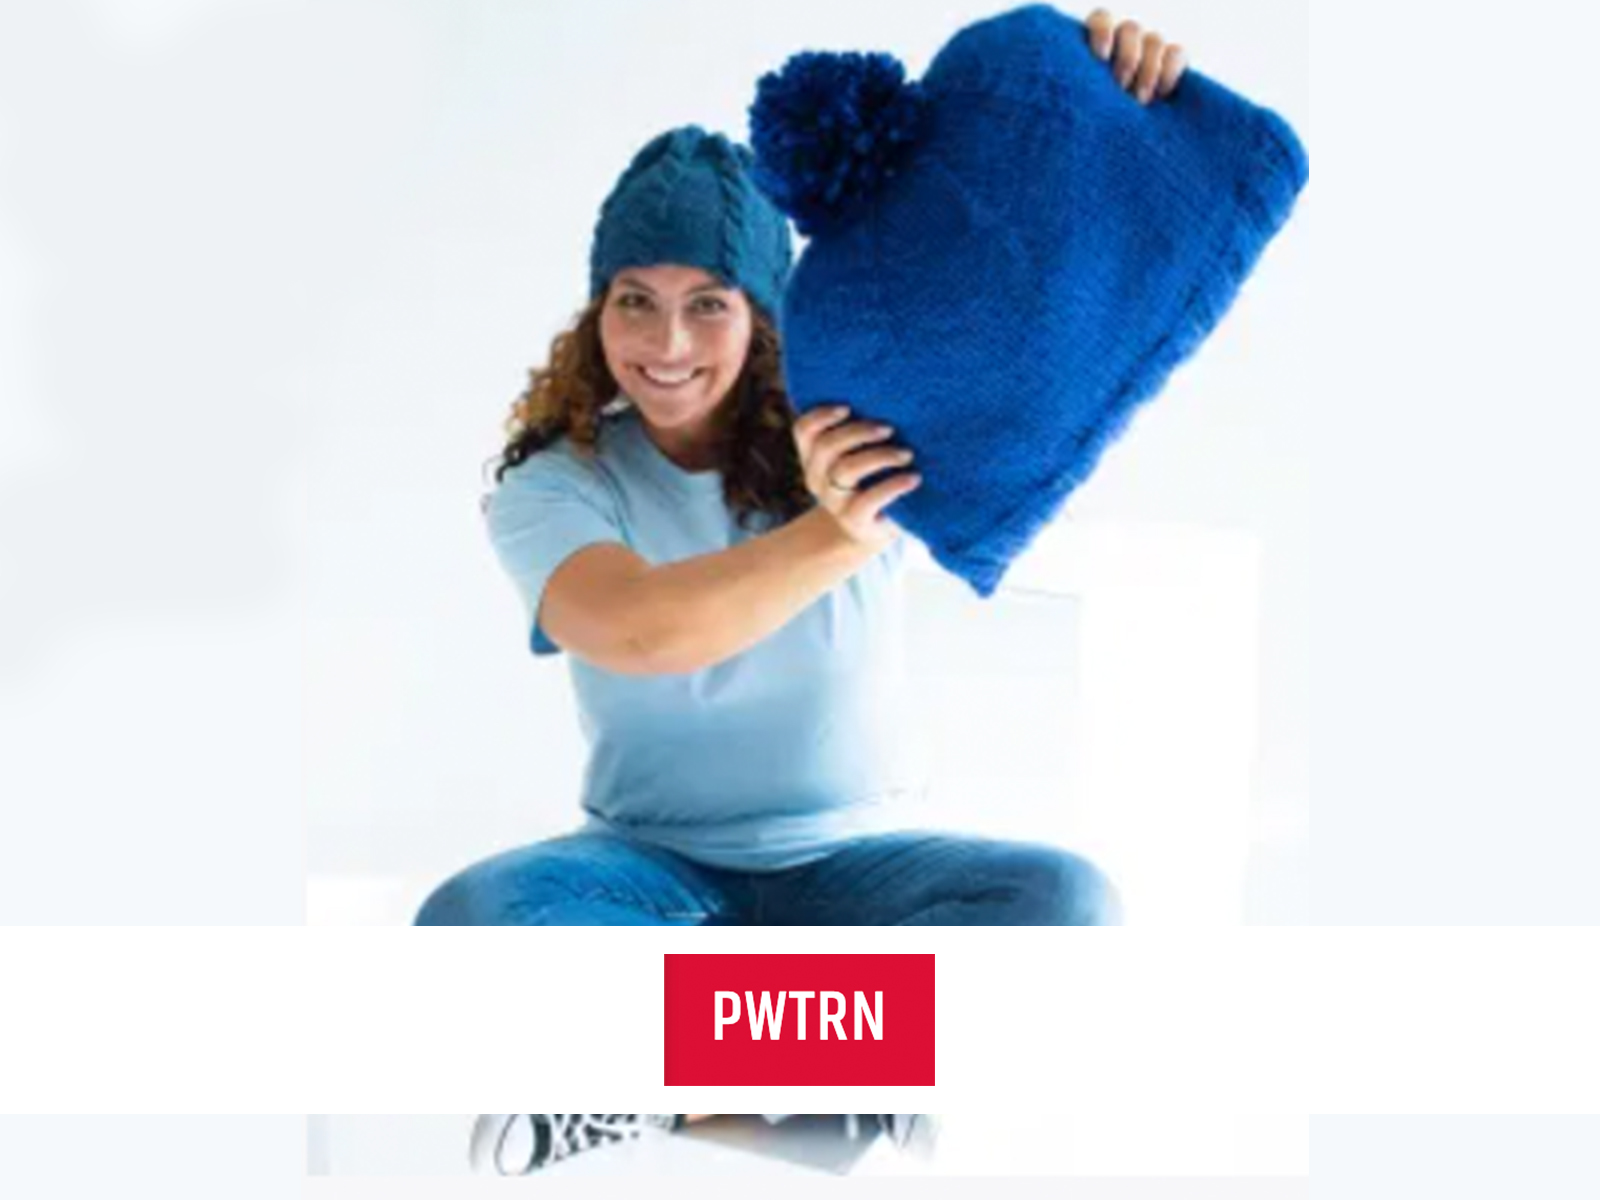 PWTRN logo overlaid on image of Shira with blue hat